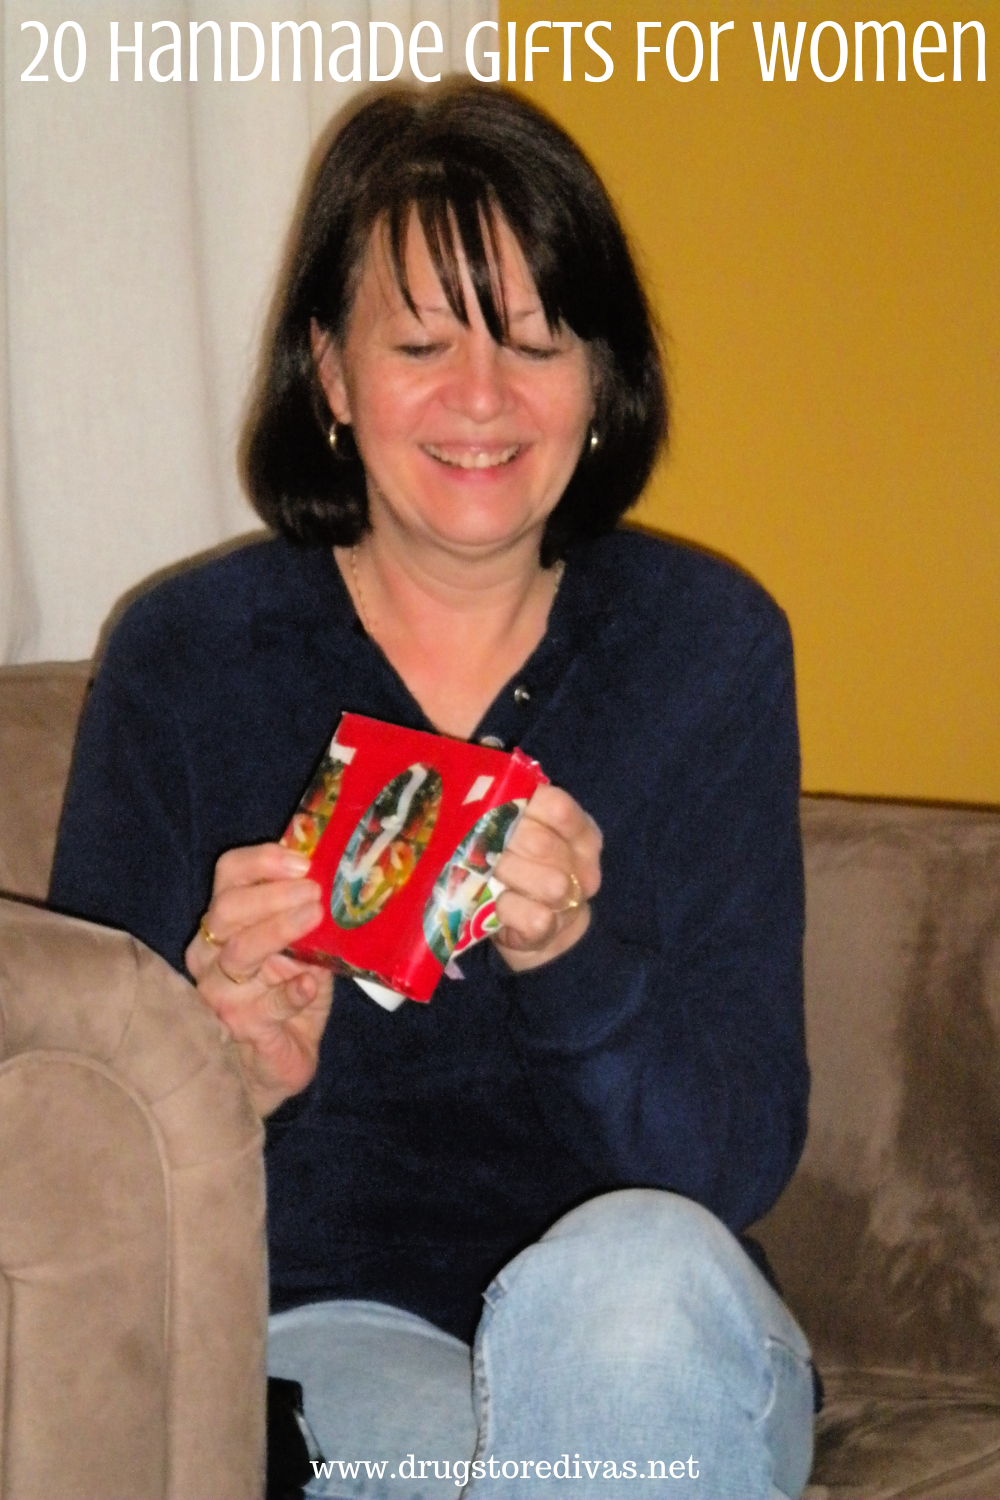 A woman sitting on a couch and opening a gift with the words 